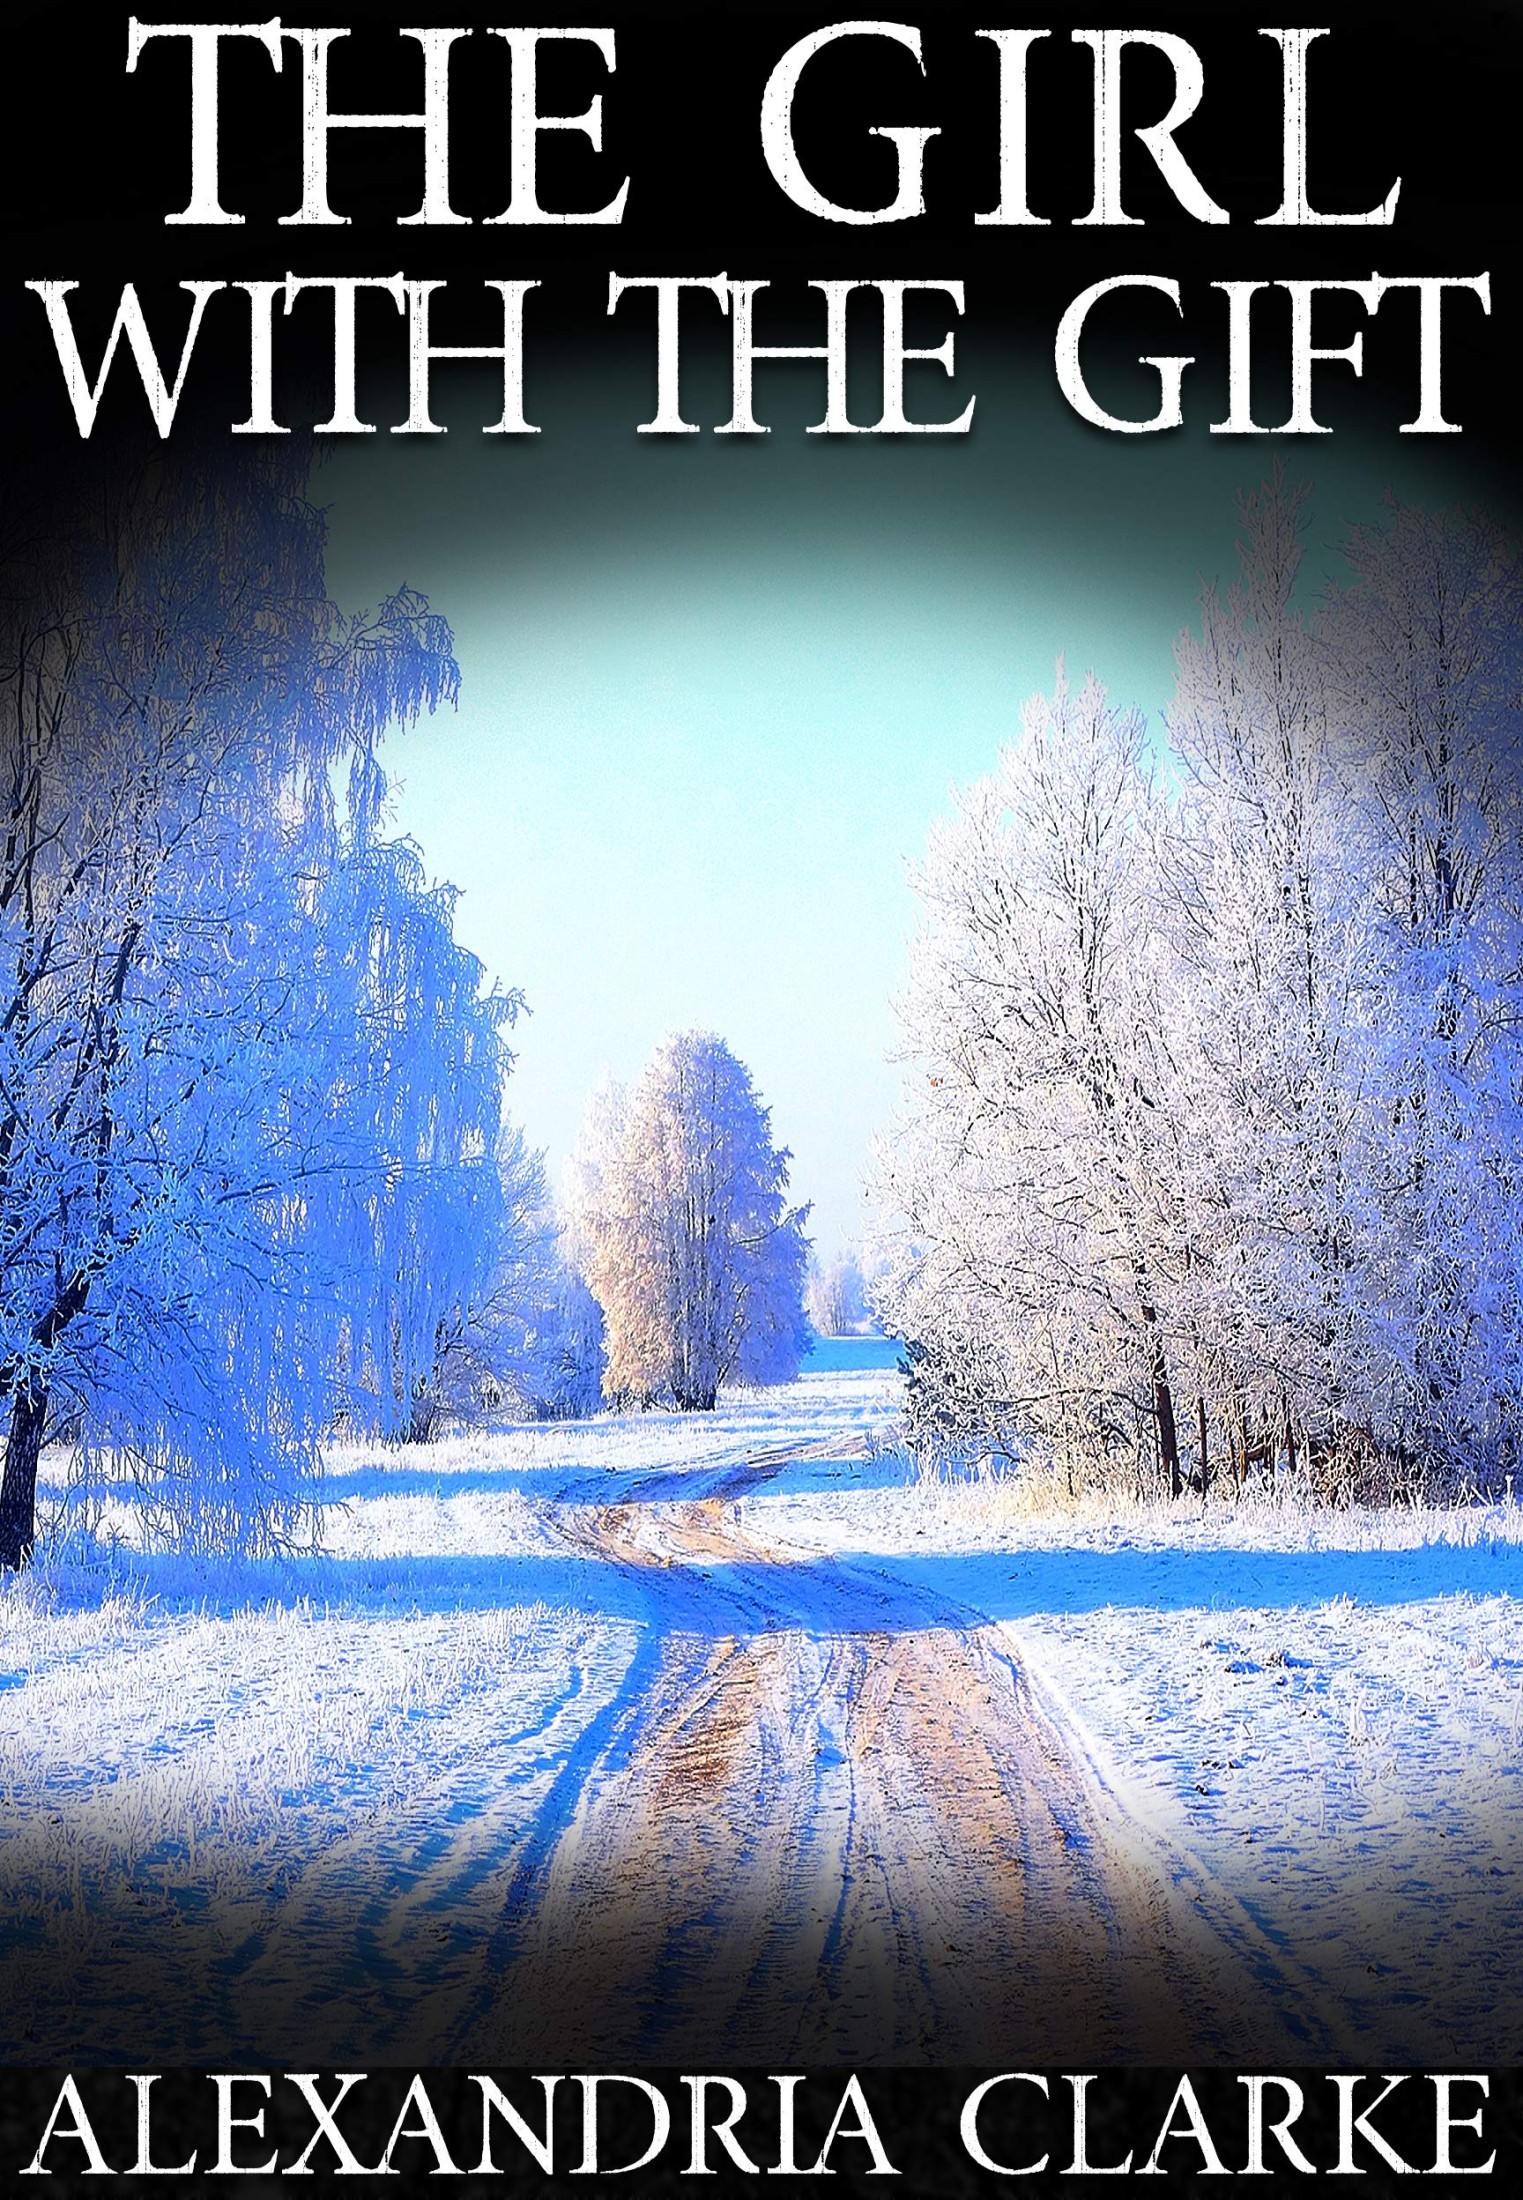 The Girl With the Gift